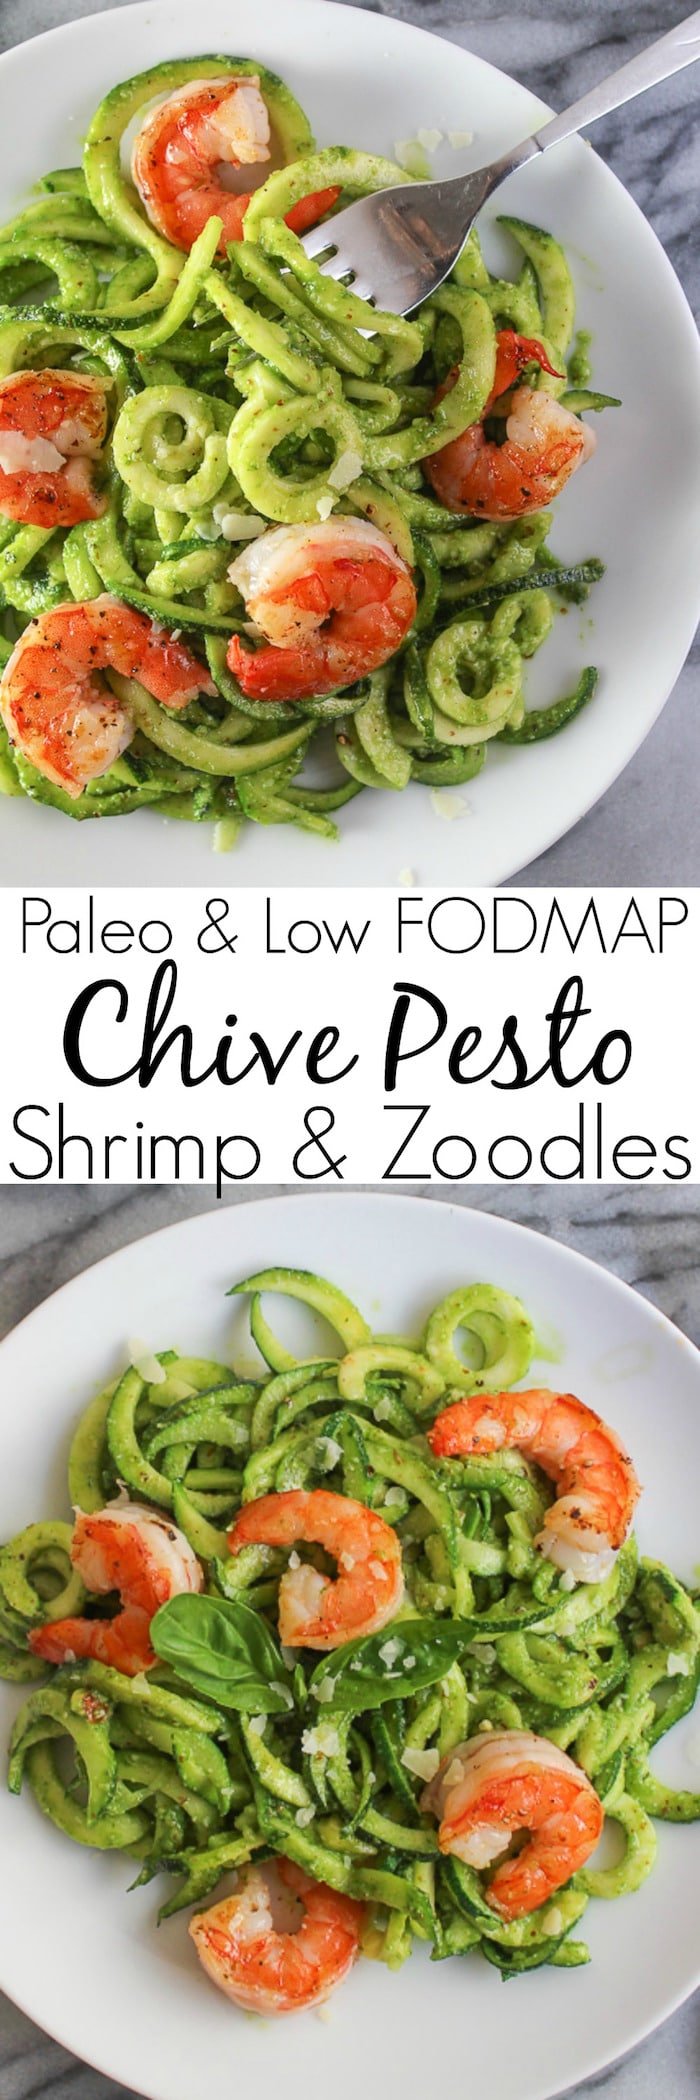 Chive Pesto Shrimp & Zoodles - paleo, low FODMAP, and whole 30 approved